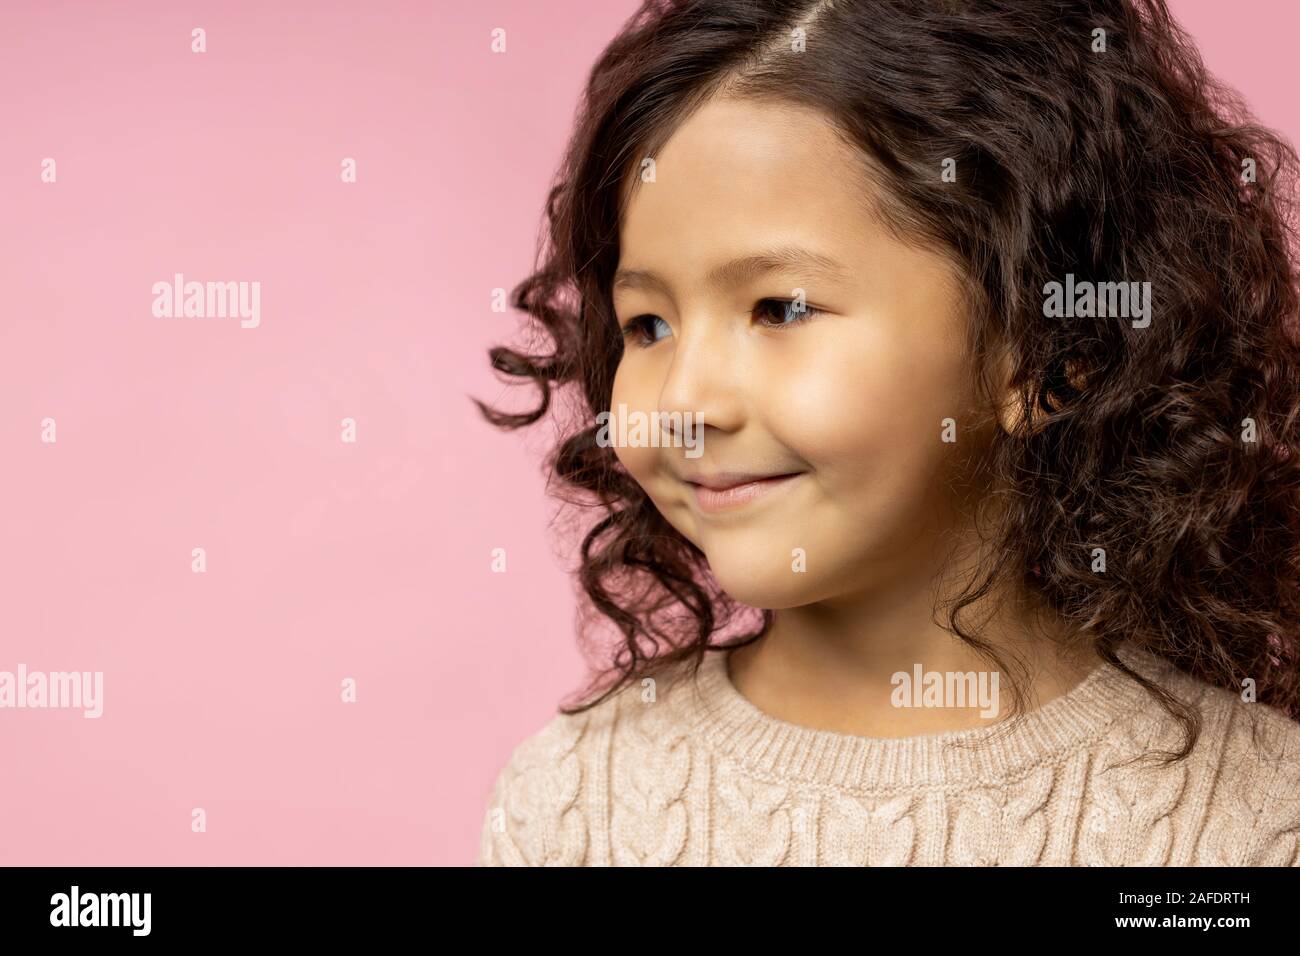 Headshot Closeup Portrait Of Charming Kid Little Girl With